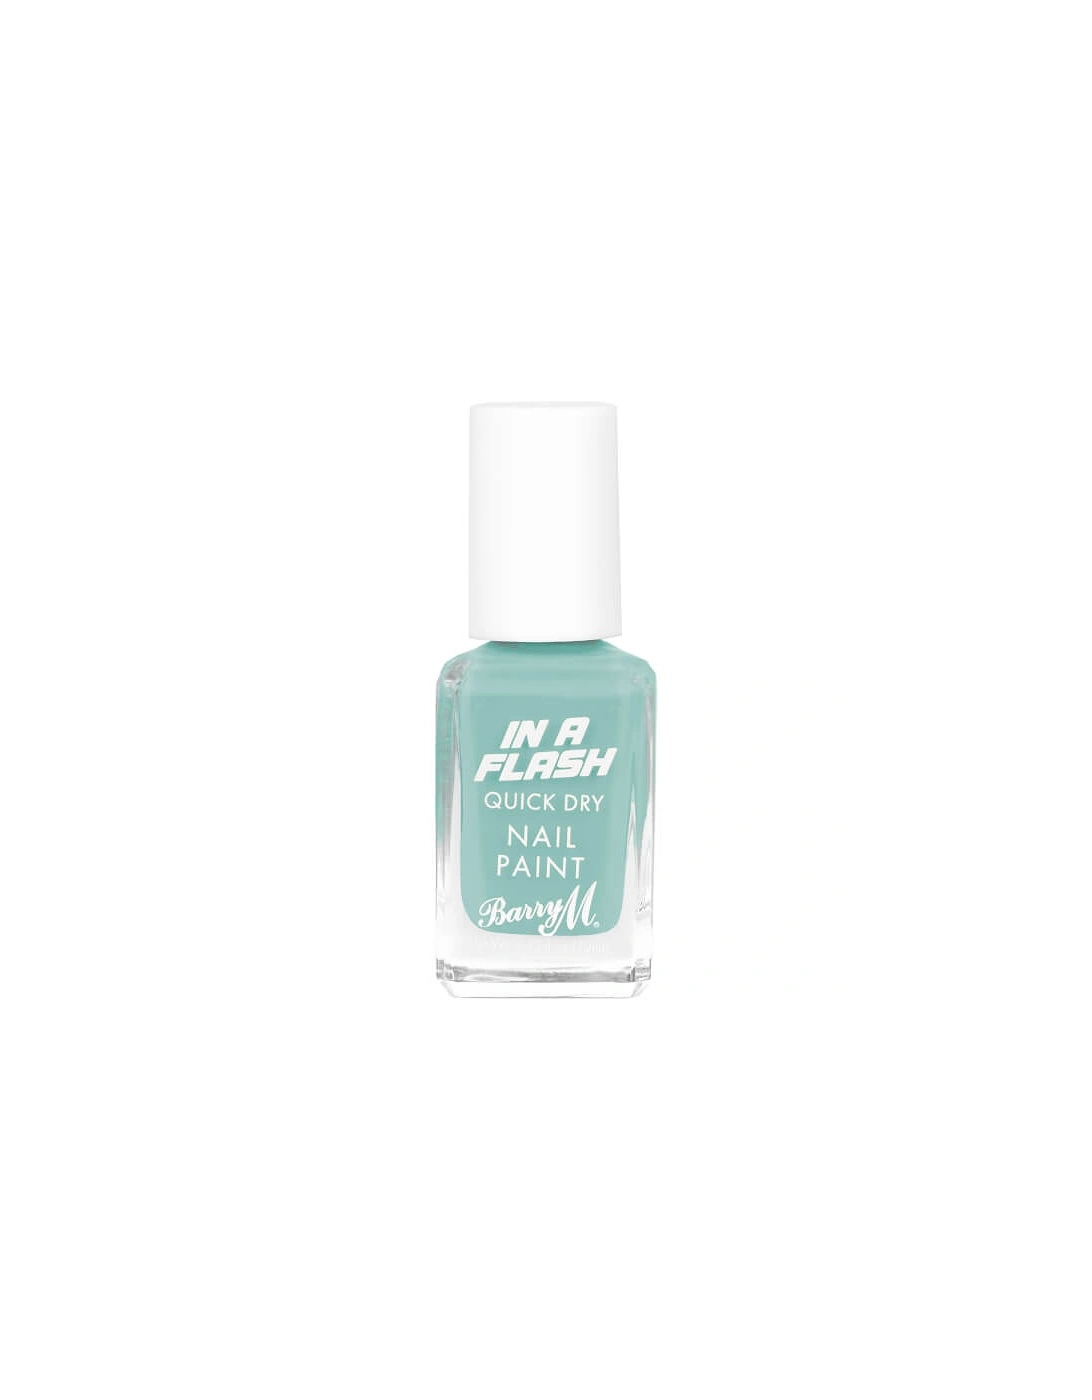 in a Flash Quick Dry Nail Paint - Blue Boost, 2 of 1